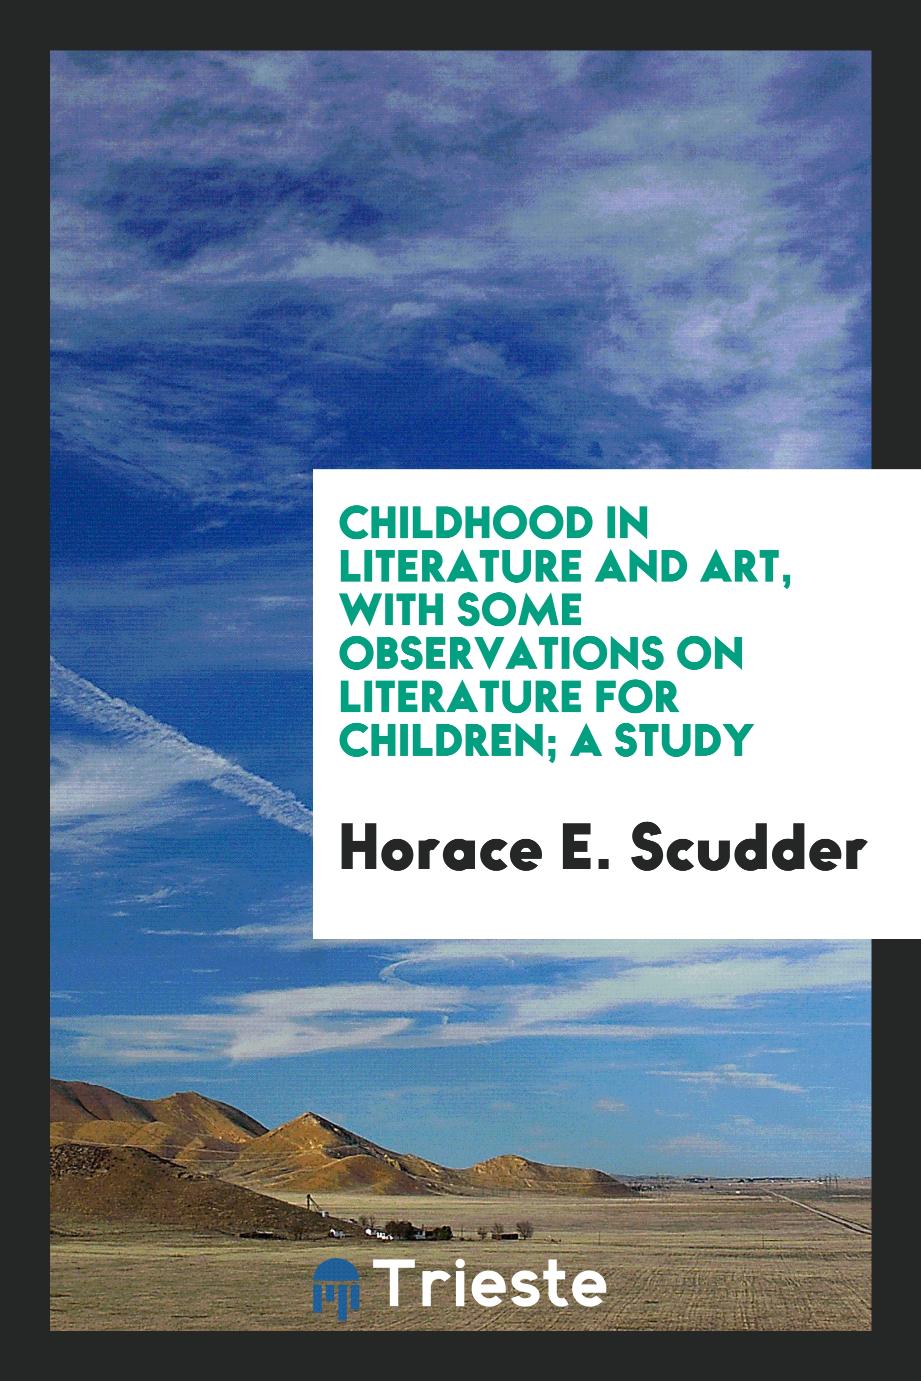 Childhood in literature and art, with some observations on literature for children; a study